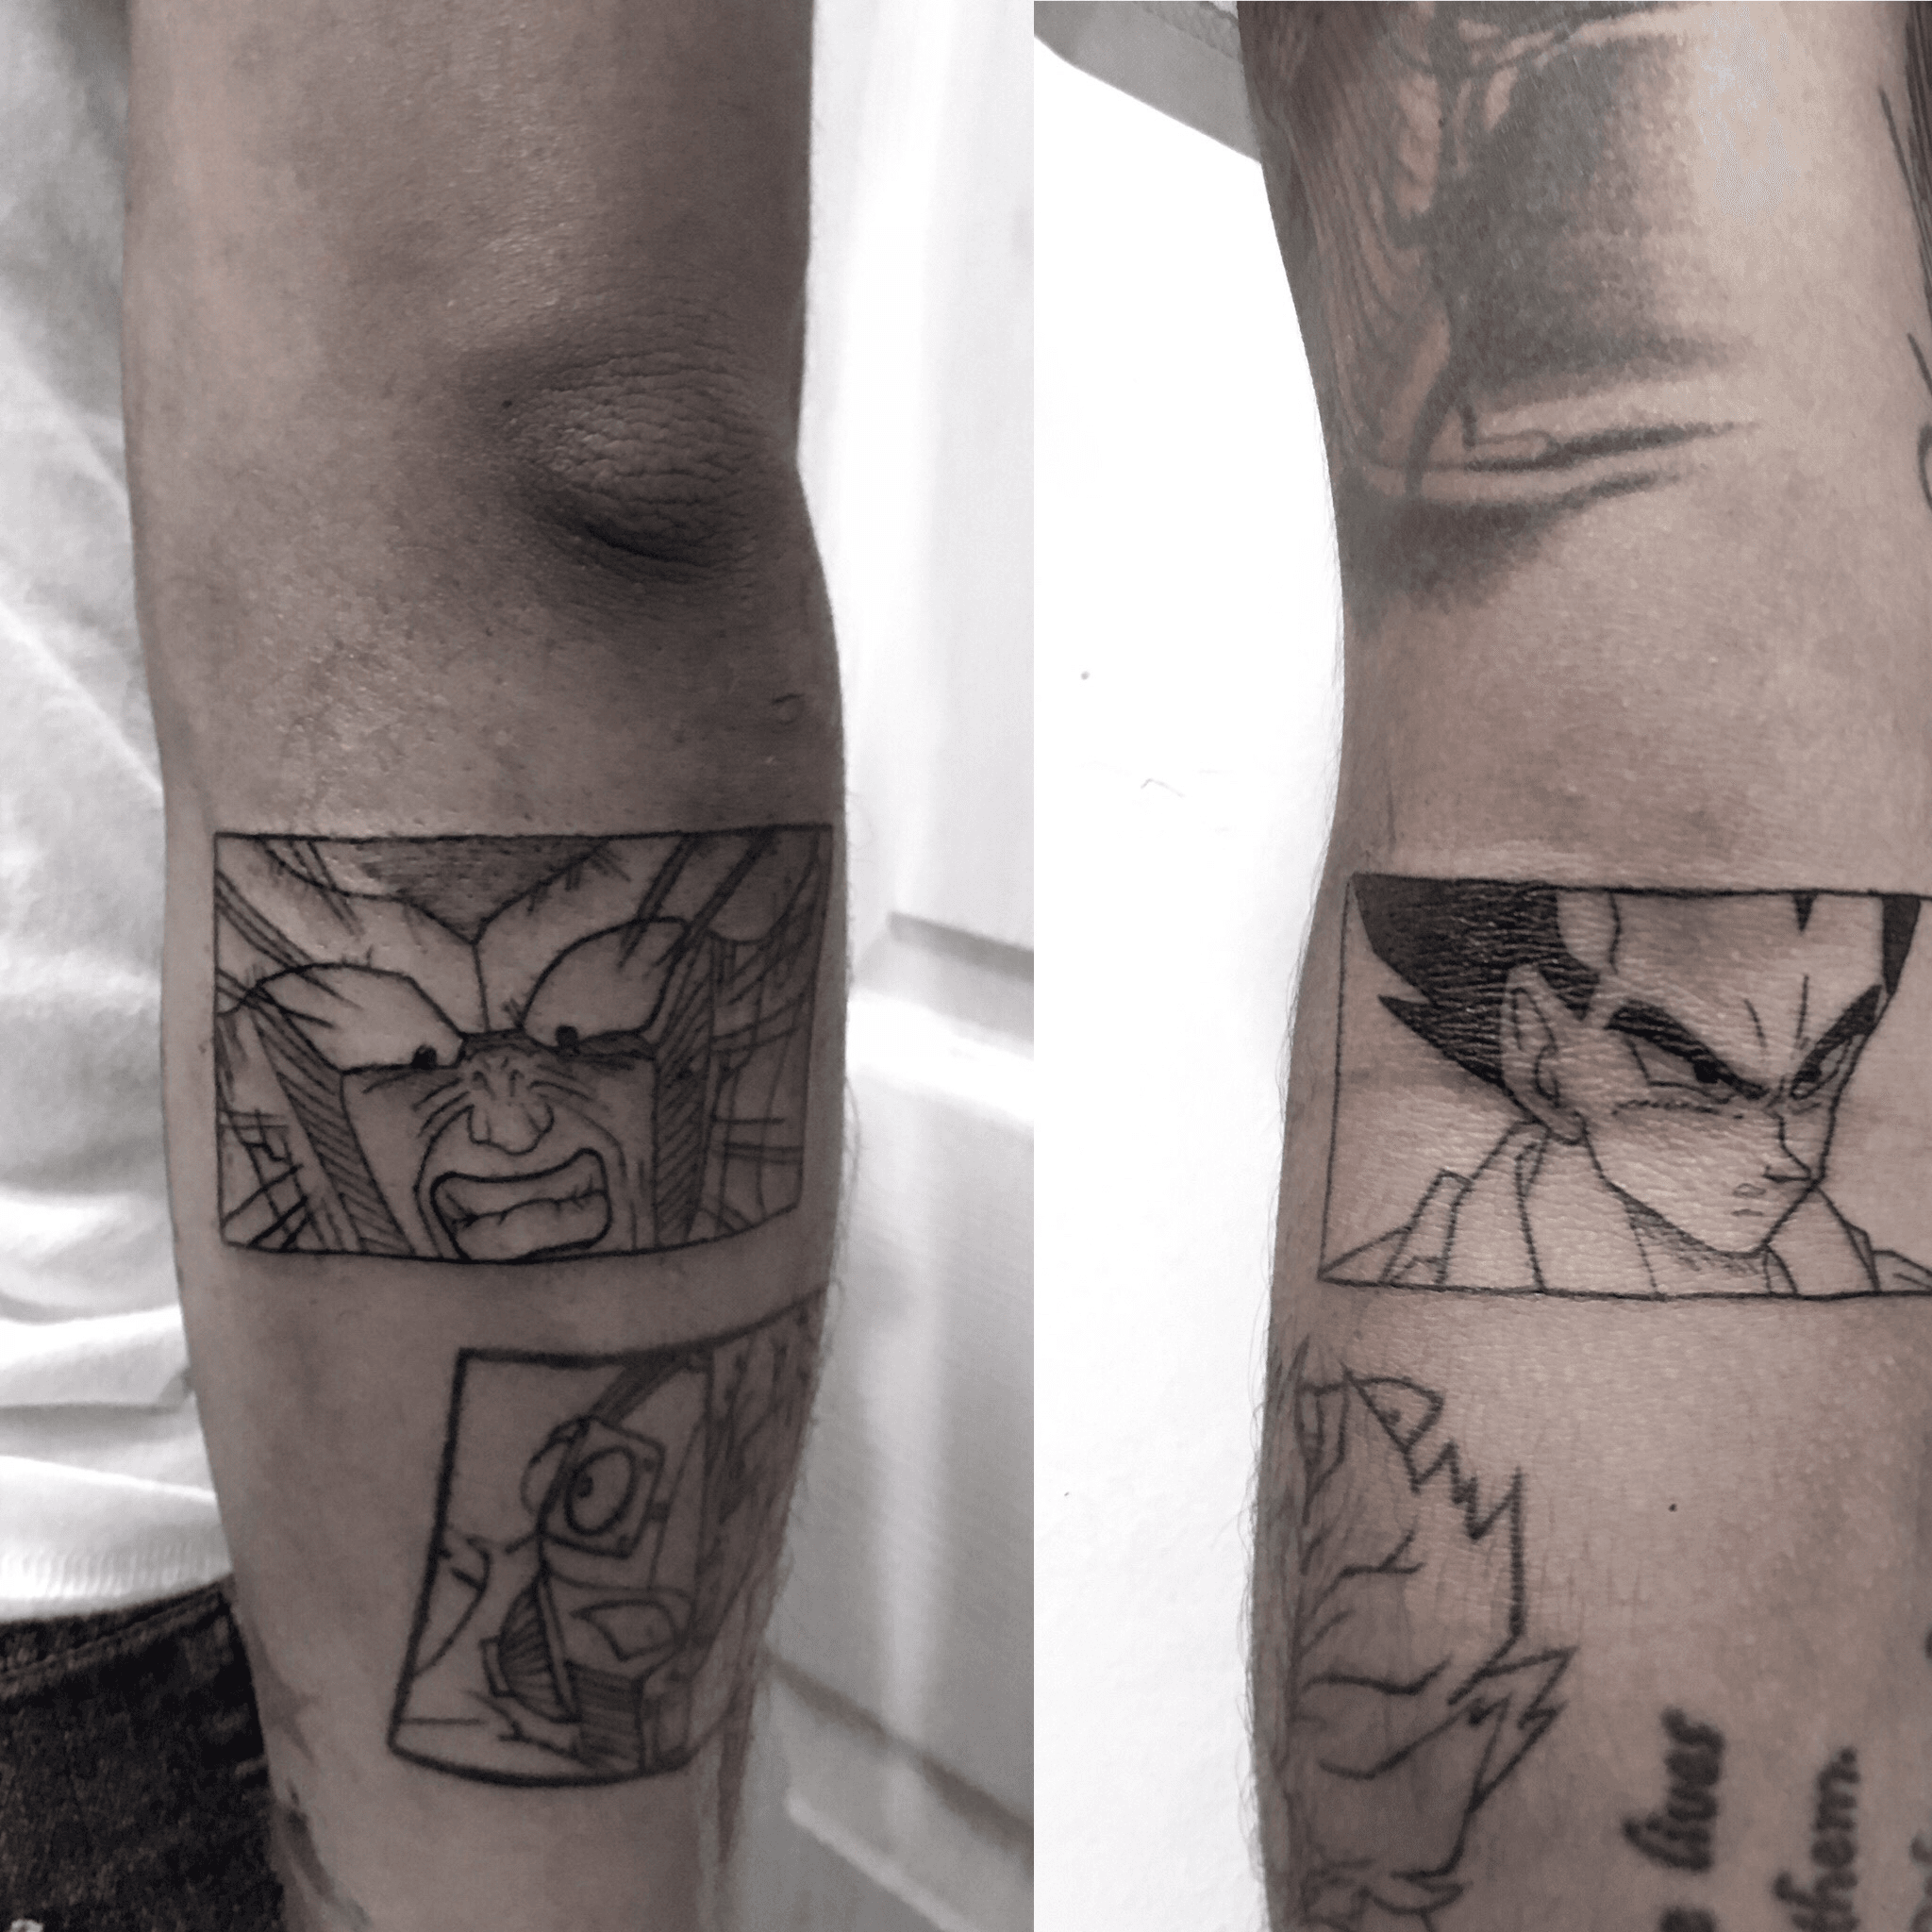 robcuellotattoo on Twitter Did someone say Infinite Void The one and  only Gojo Satoru from Jujutsu Kaisen  jujutsukaisen jujutsukaisenanime  jujutsukaisenmanga jujutsukaisenfanart jujutsukaisengojo  jujutsukaisentattoo jujutsukaisenart 